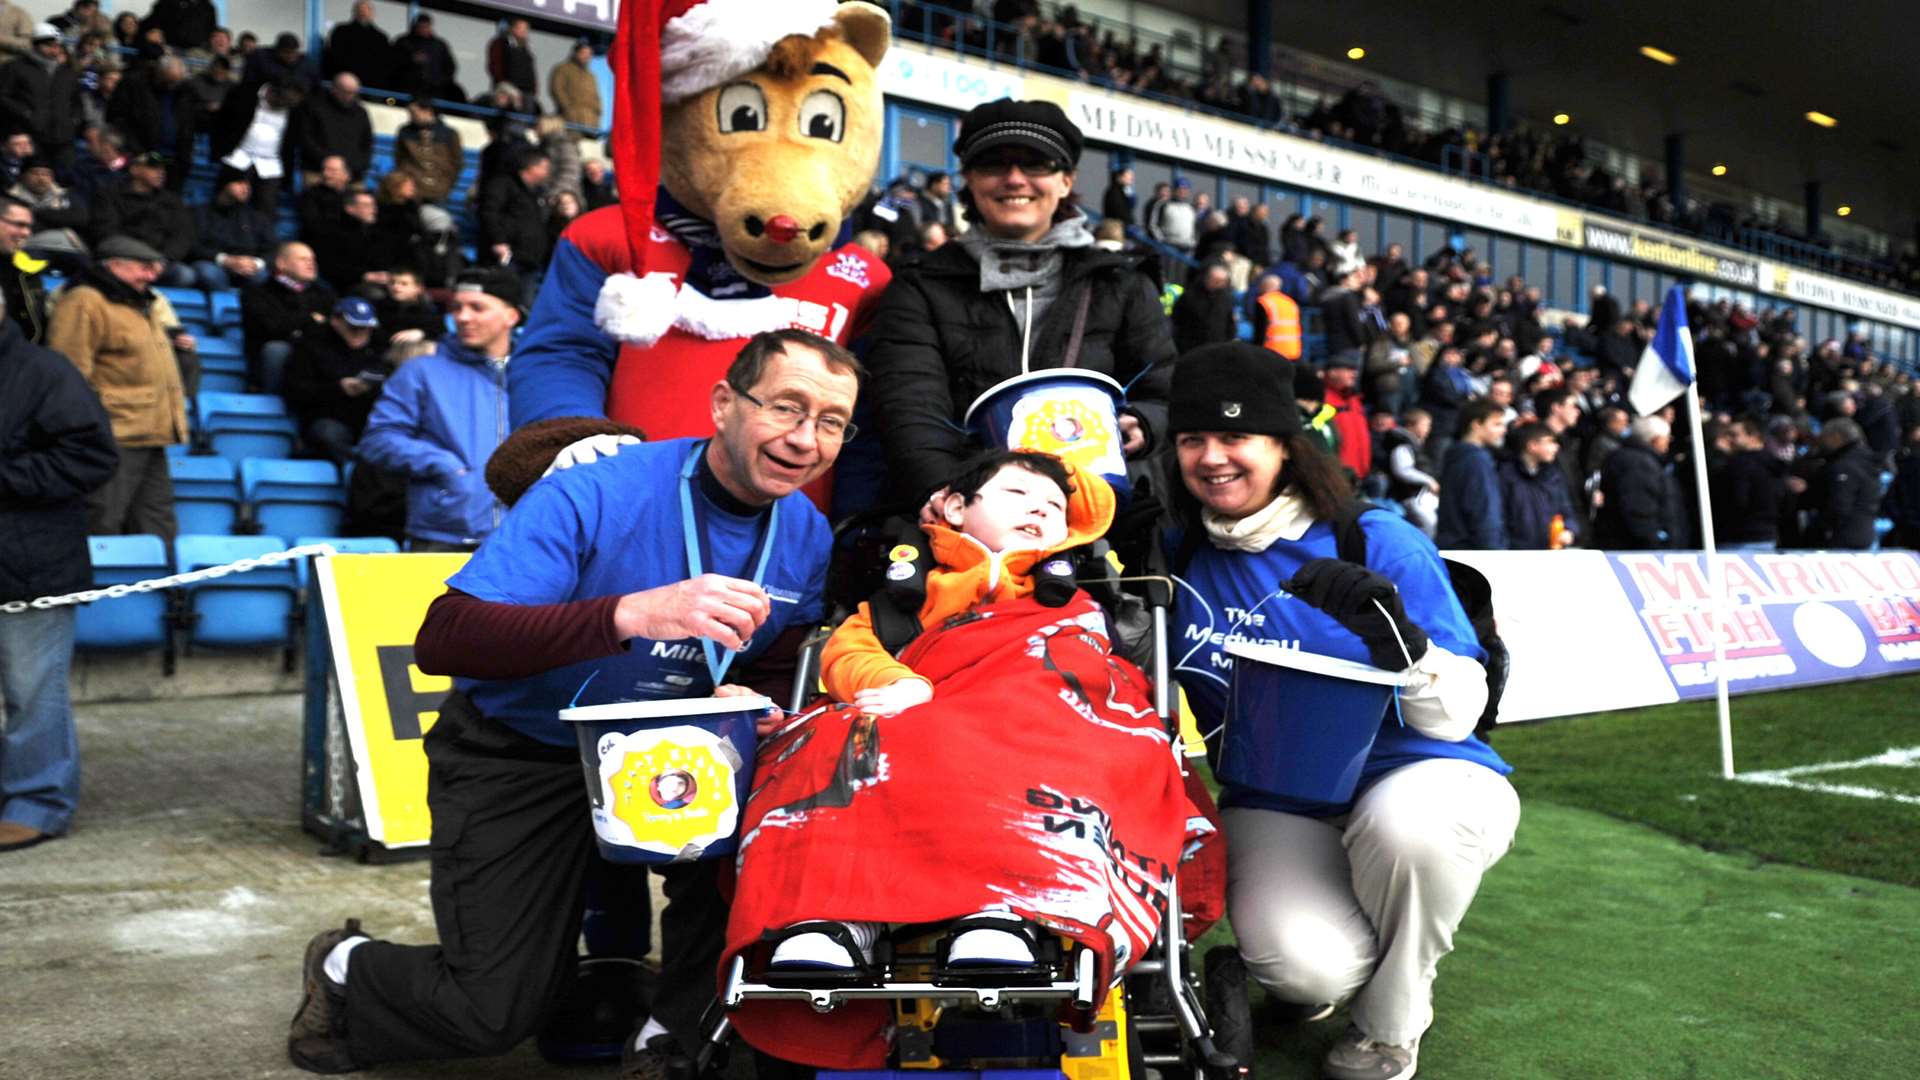 Medway Mayor Cllr. Vaughan Hewett with Terry at Gillingham FC's boxing day match in 2012.